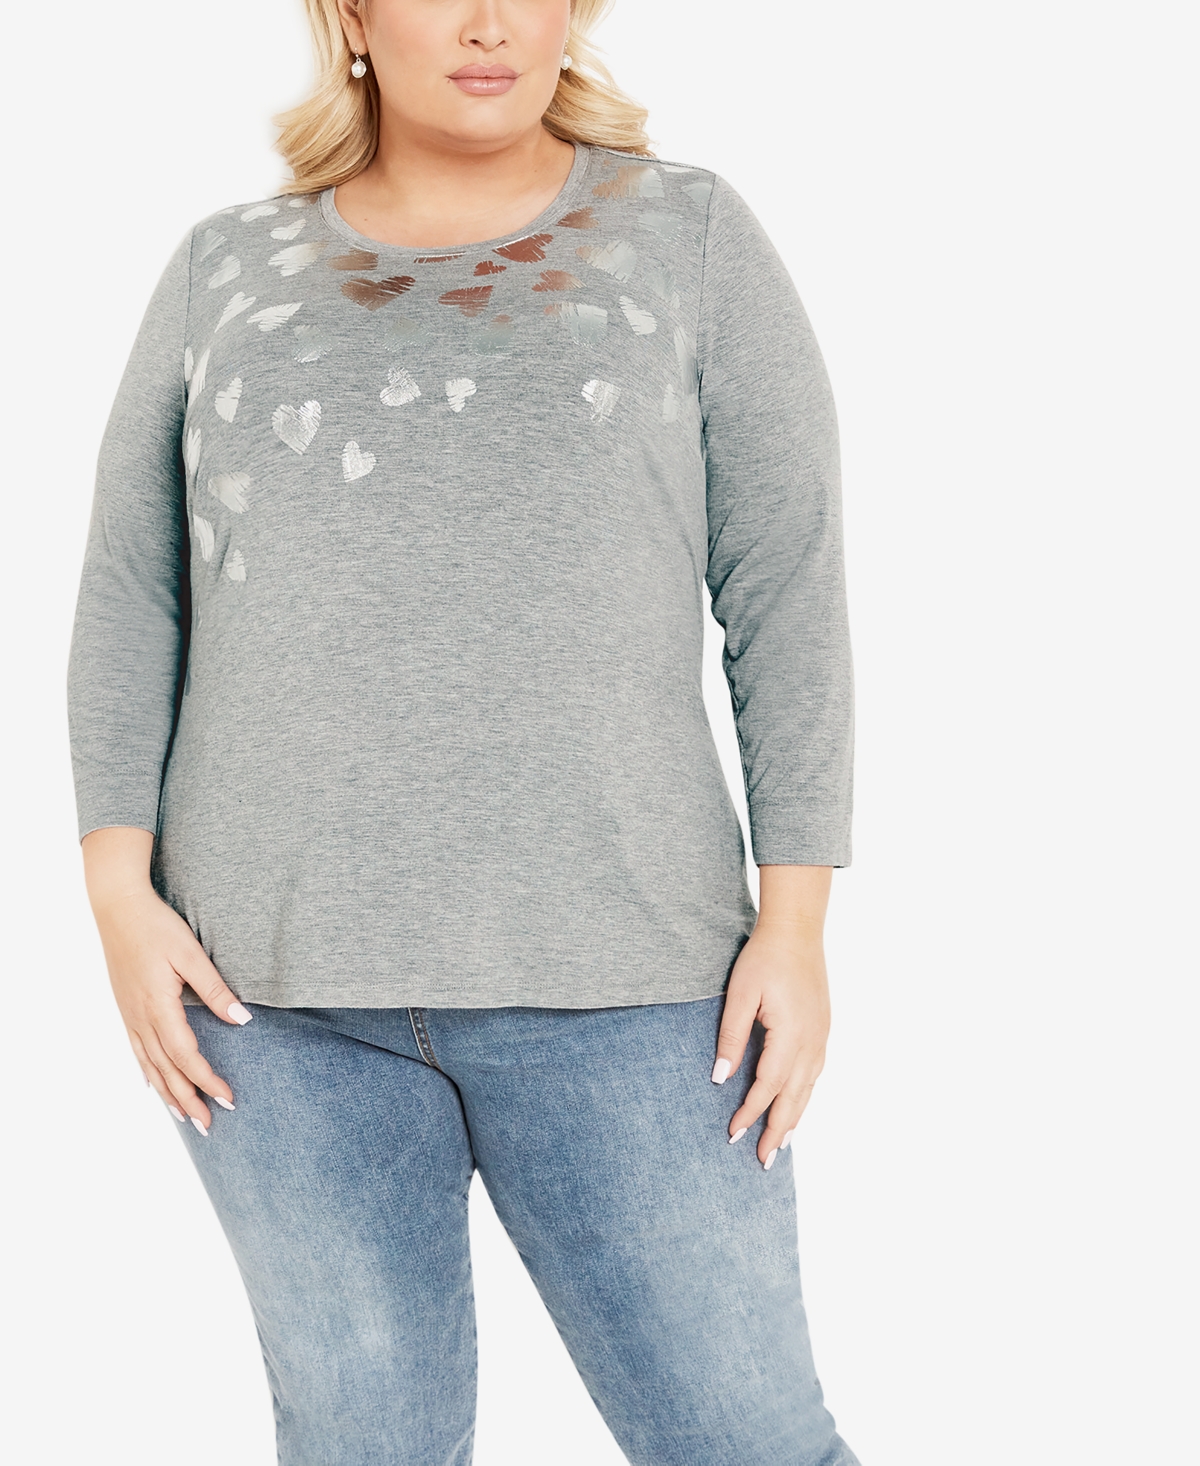 Avenue Plus Size Foil Heart 3/4 Sleeve Top In Gray Marle